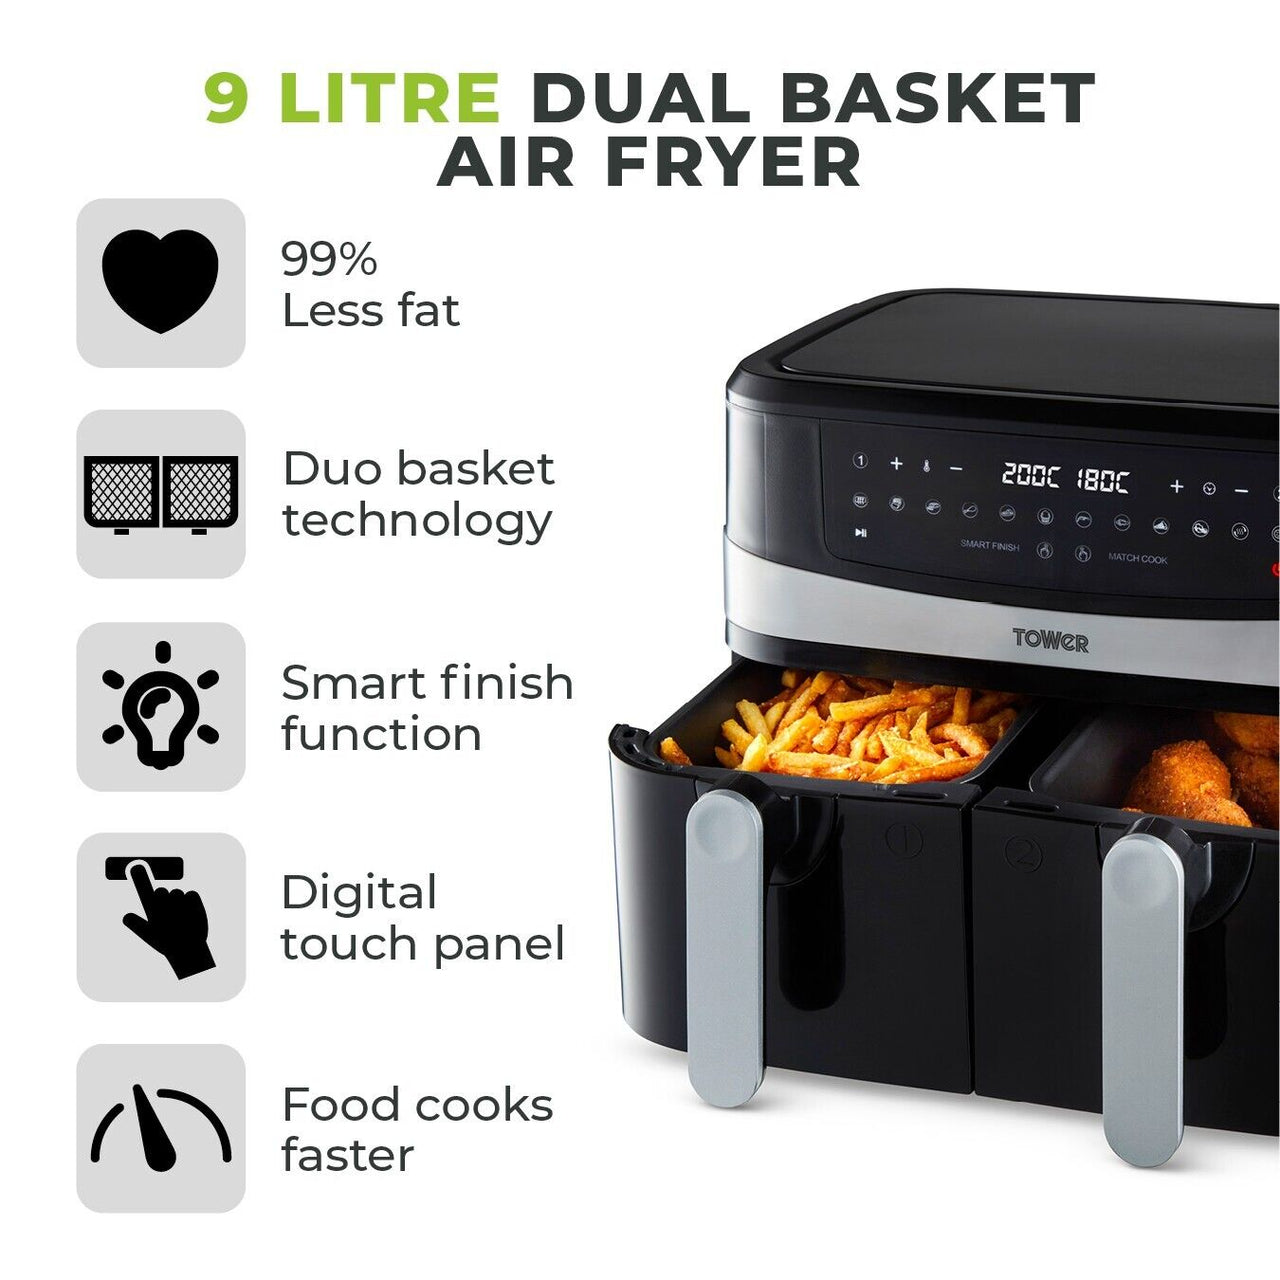 Tower Air Fryer Vortx T17088 9L Dual Basket Family Size New with 3 Yr Guarantee